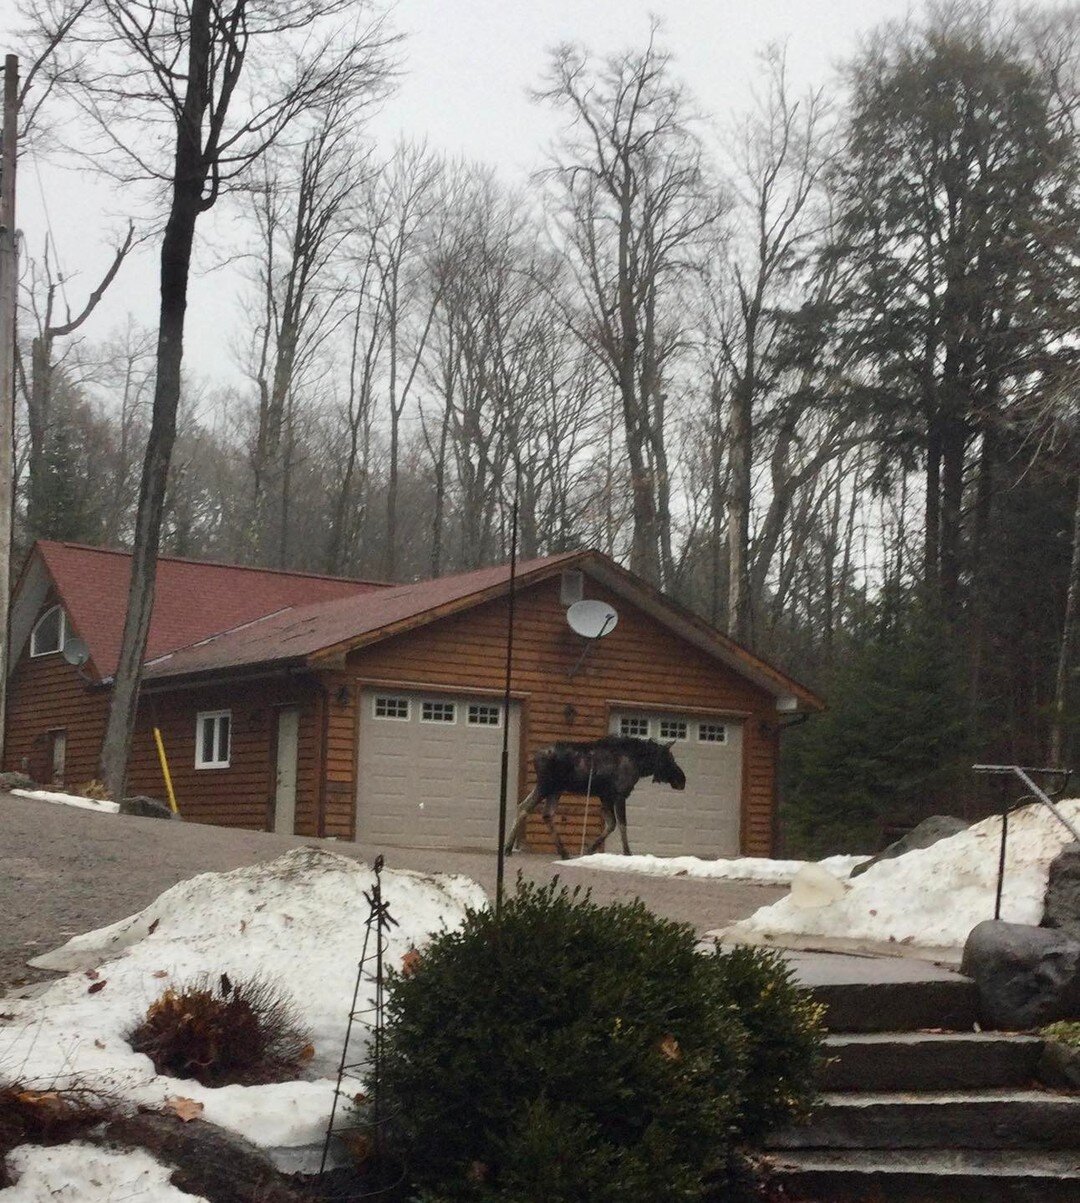 We had a visitor on our driveway this morning. What a privilege to see a moose!